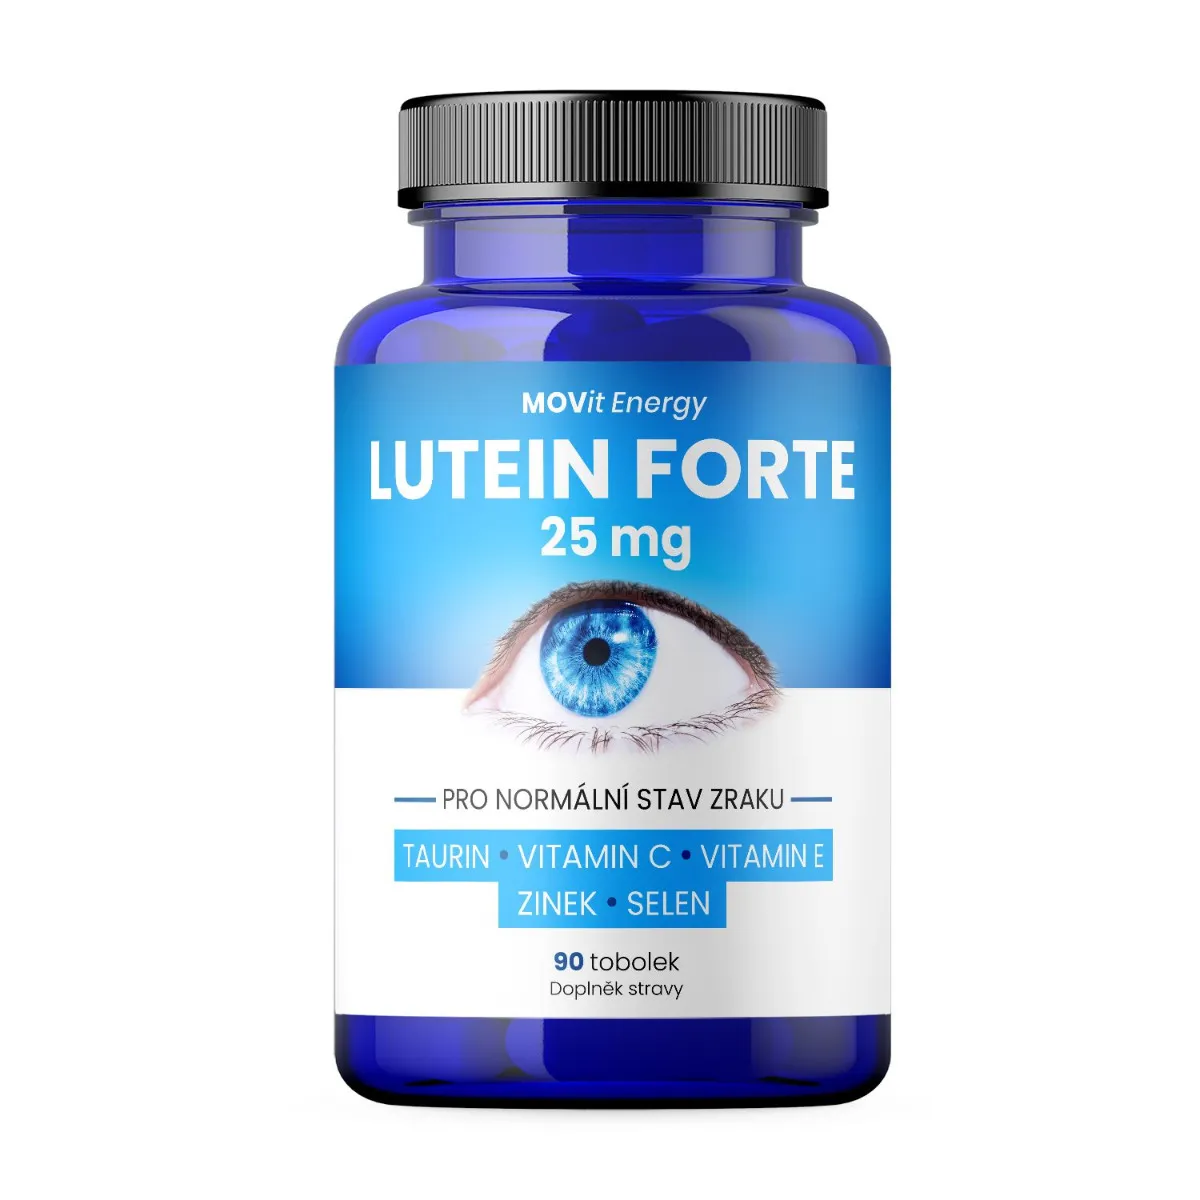 MOVit Energy Lutein Forte 25 mg + Taurin